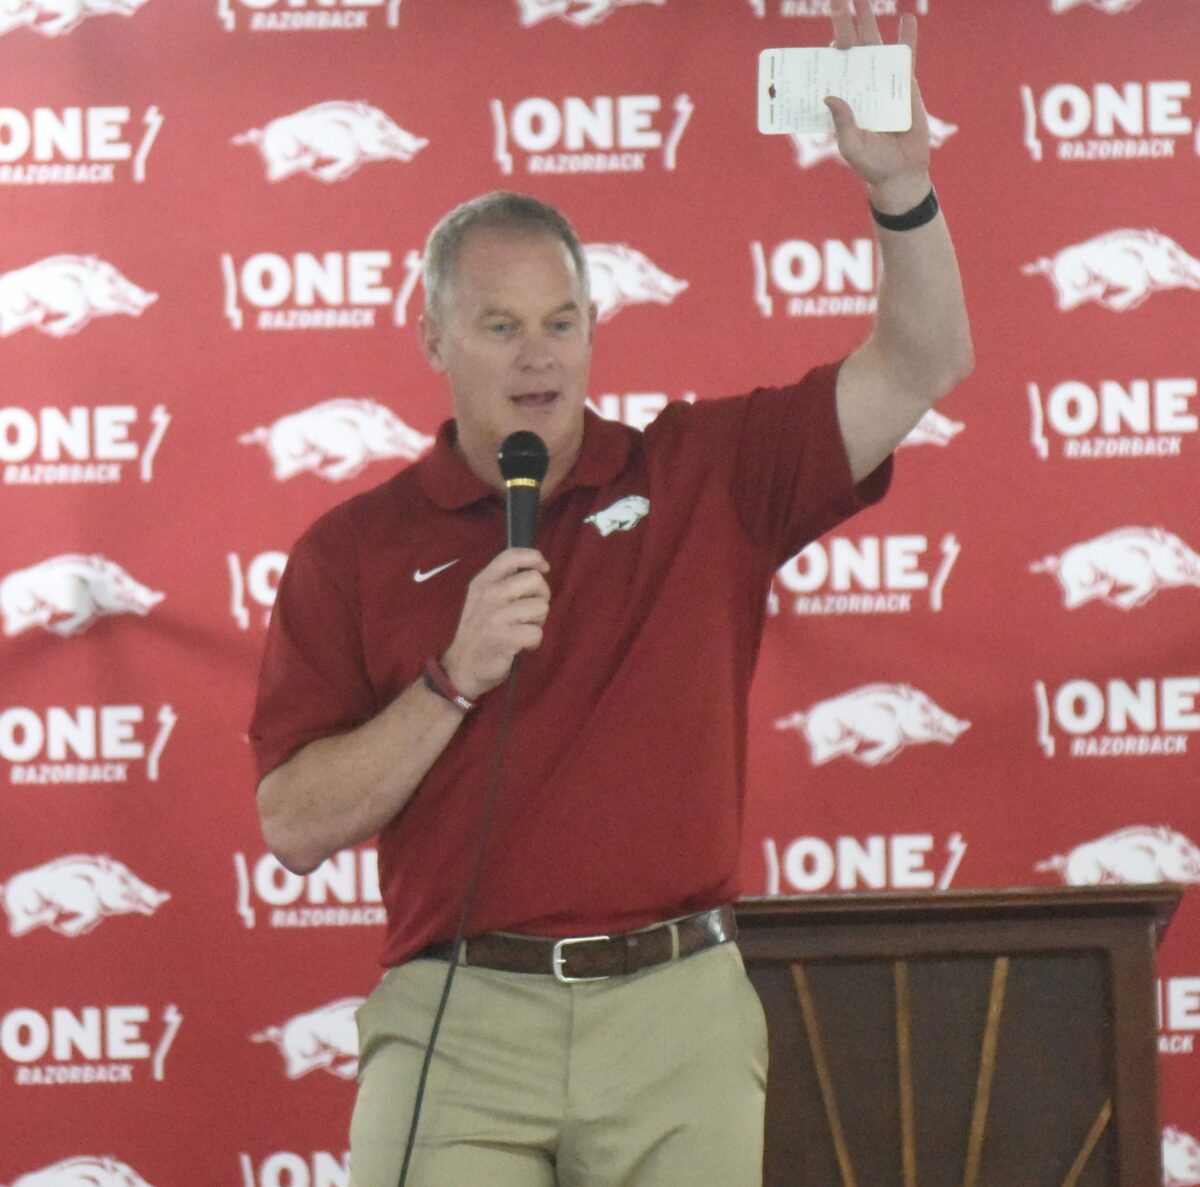 What’s the matter with Arkansas’ football program? “Nothing,” AD says